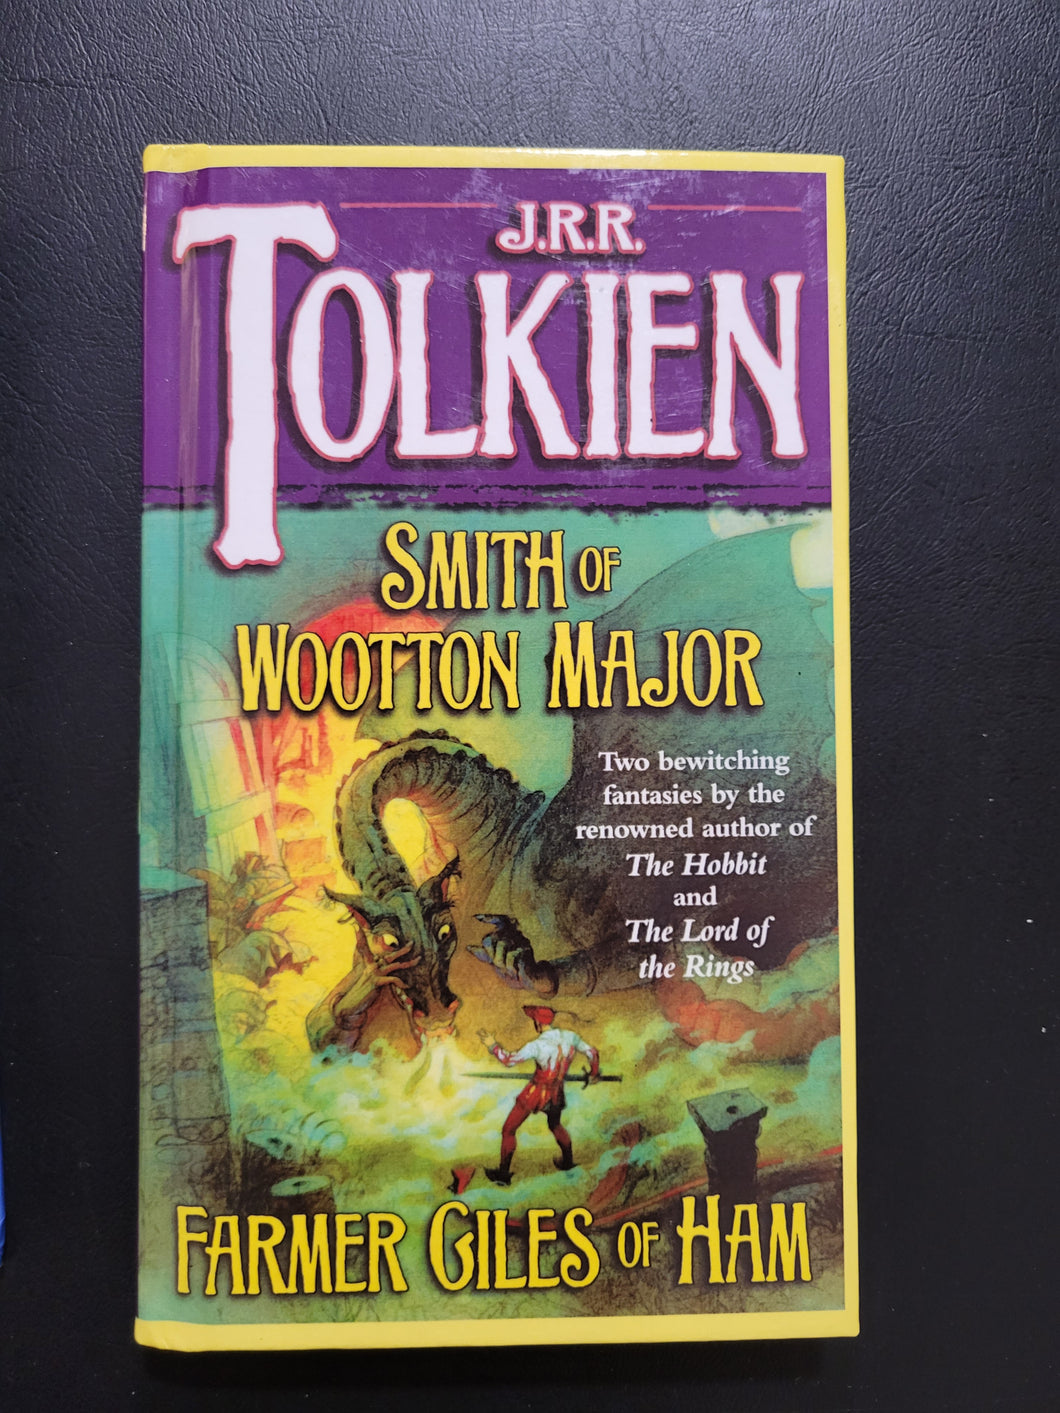 Smith of Wootton Major by J.R.R Tolkien